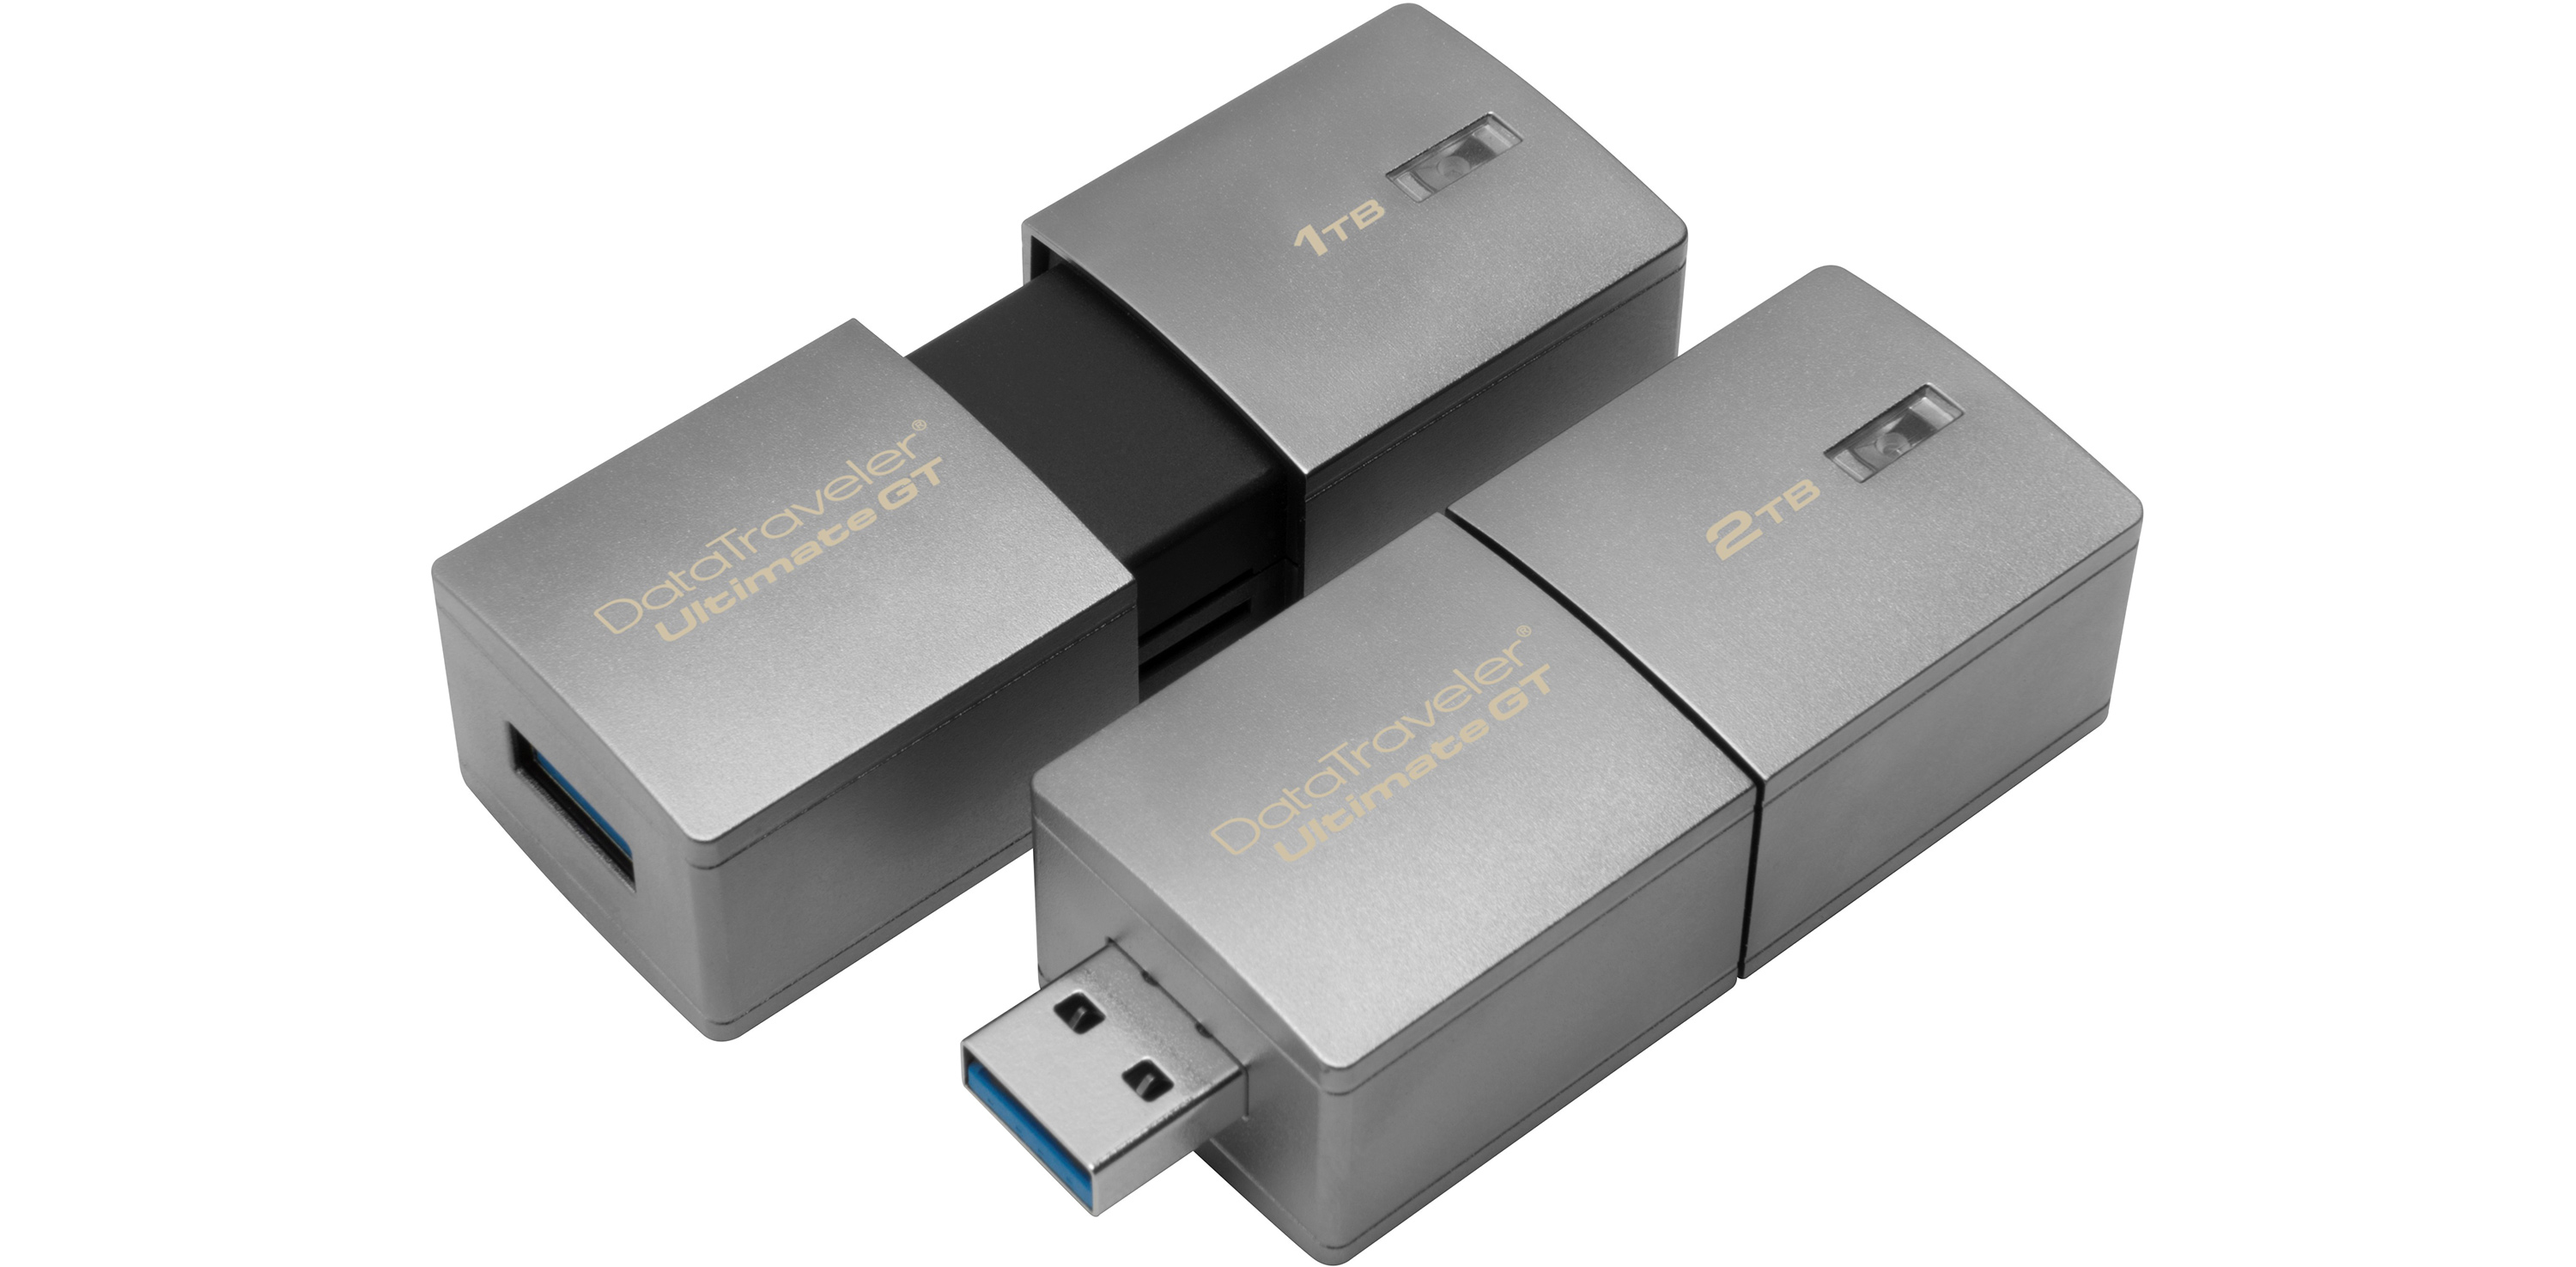 Kingston Launches DataTraveler Ultimate GT Flash Drive with 2 TB Capacity